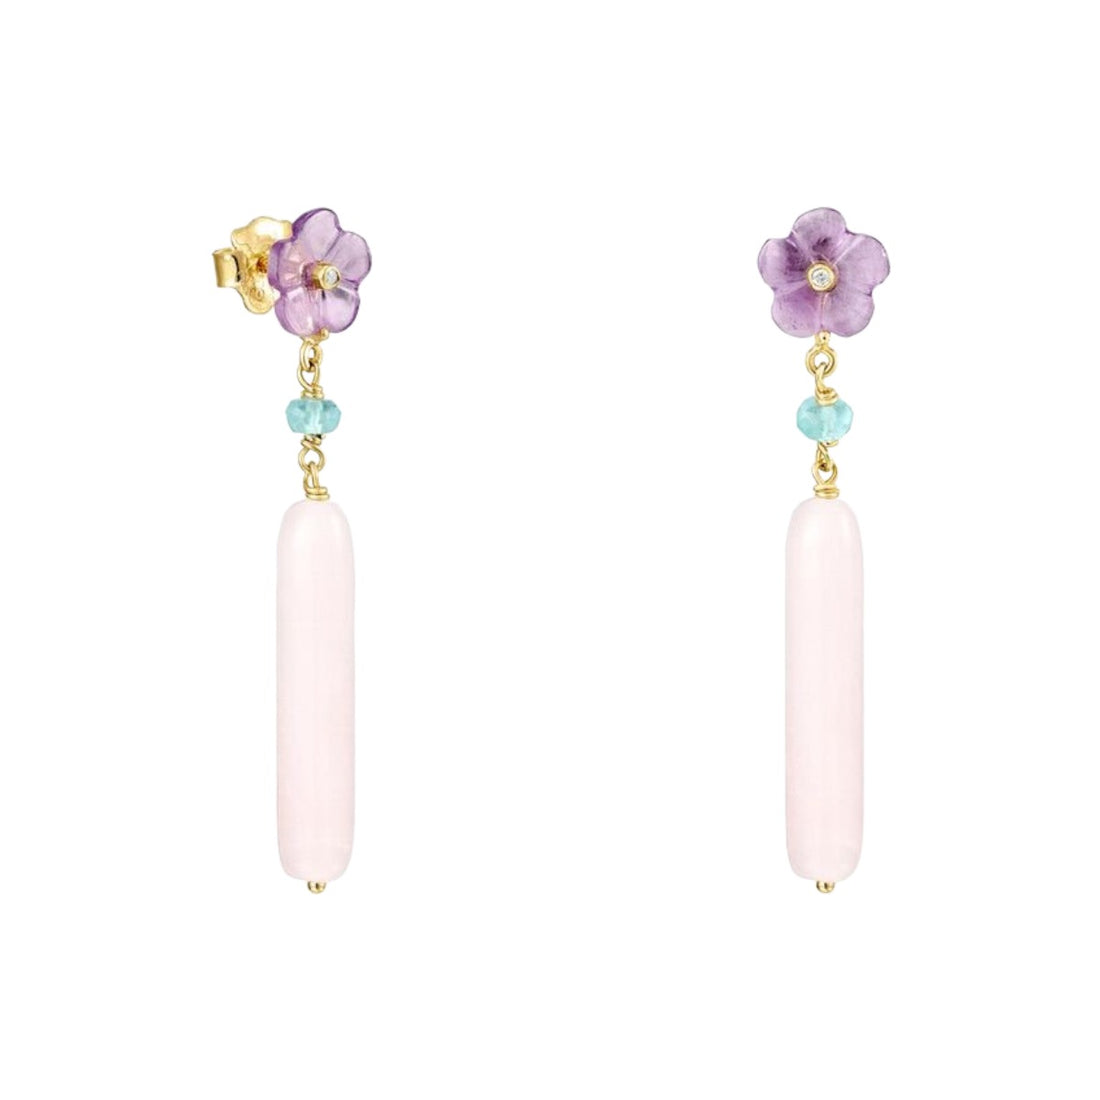 TOUS 18Kt Gold Earrings with Amethysts and Pink Opals